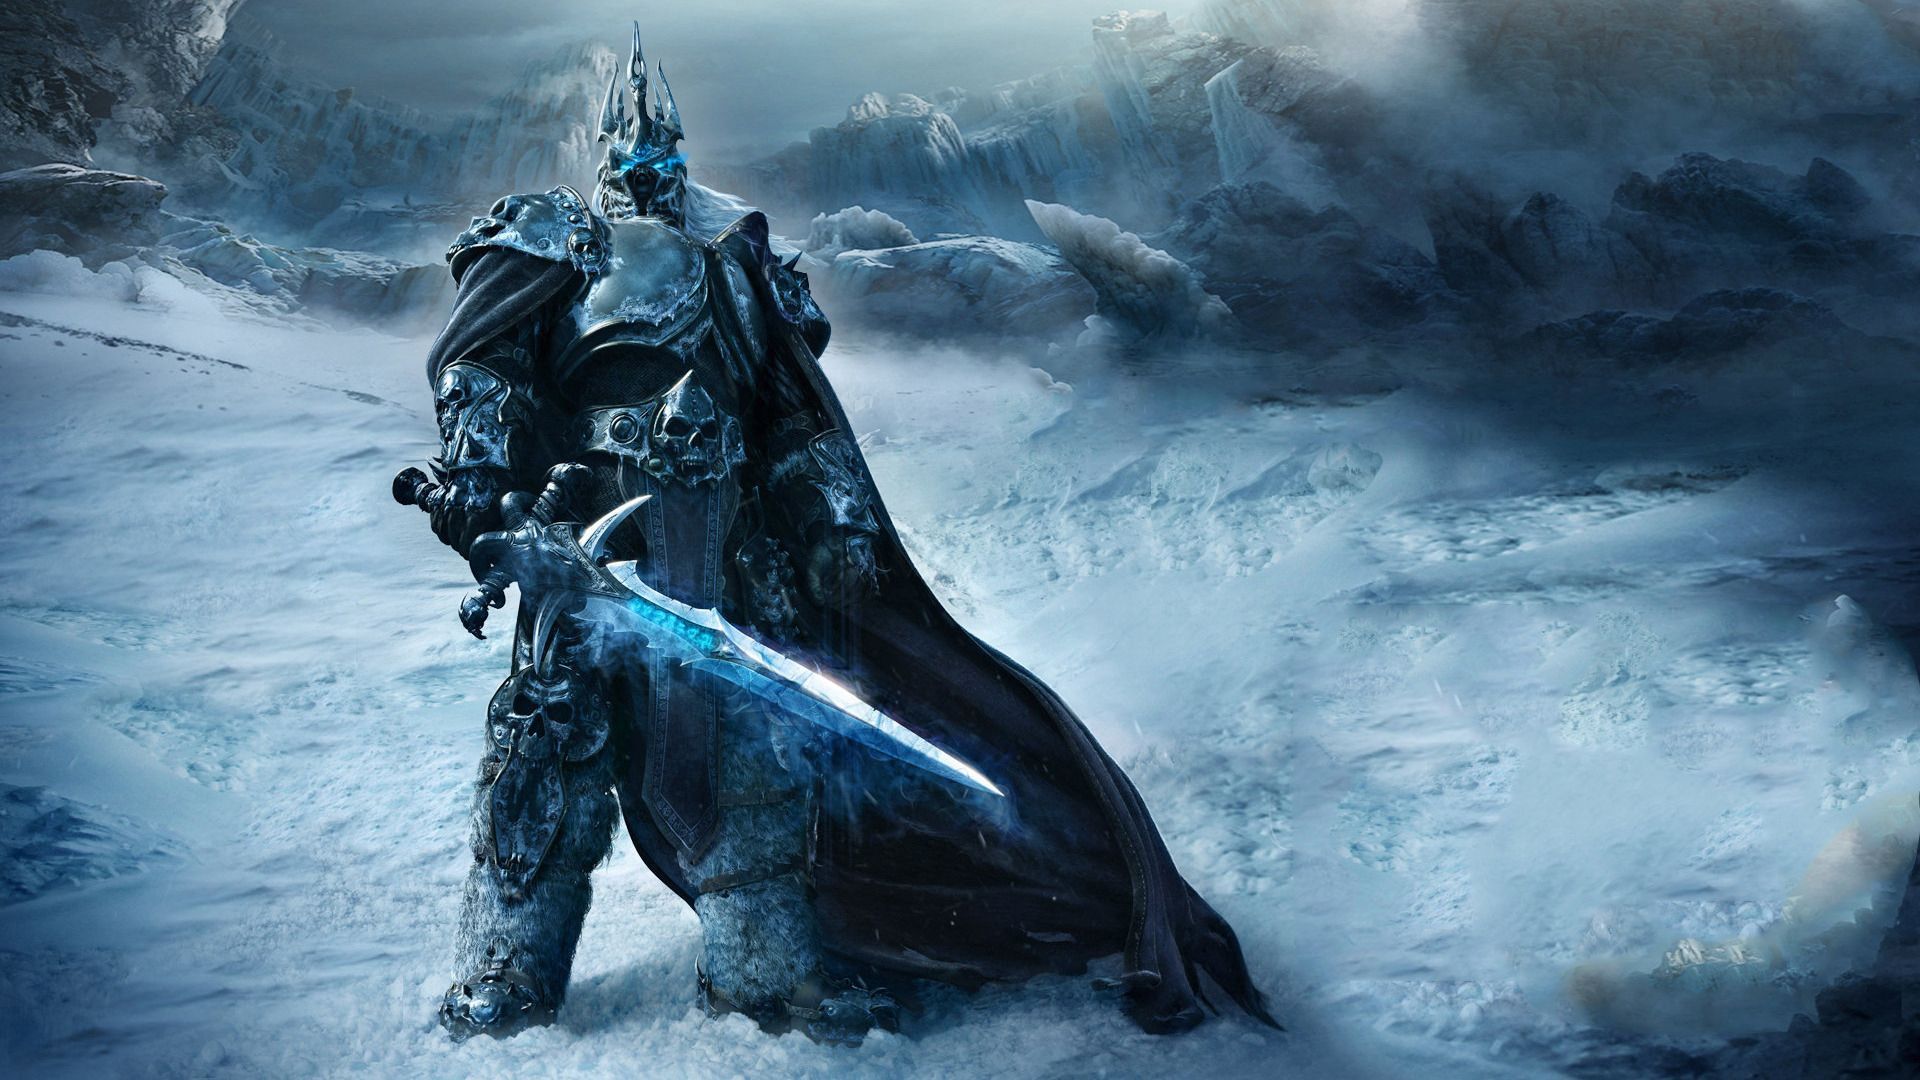 World of Warcraft Wrath of the Lich King Wallpapers | HD Wallpapers